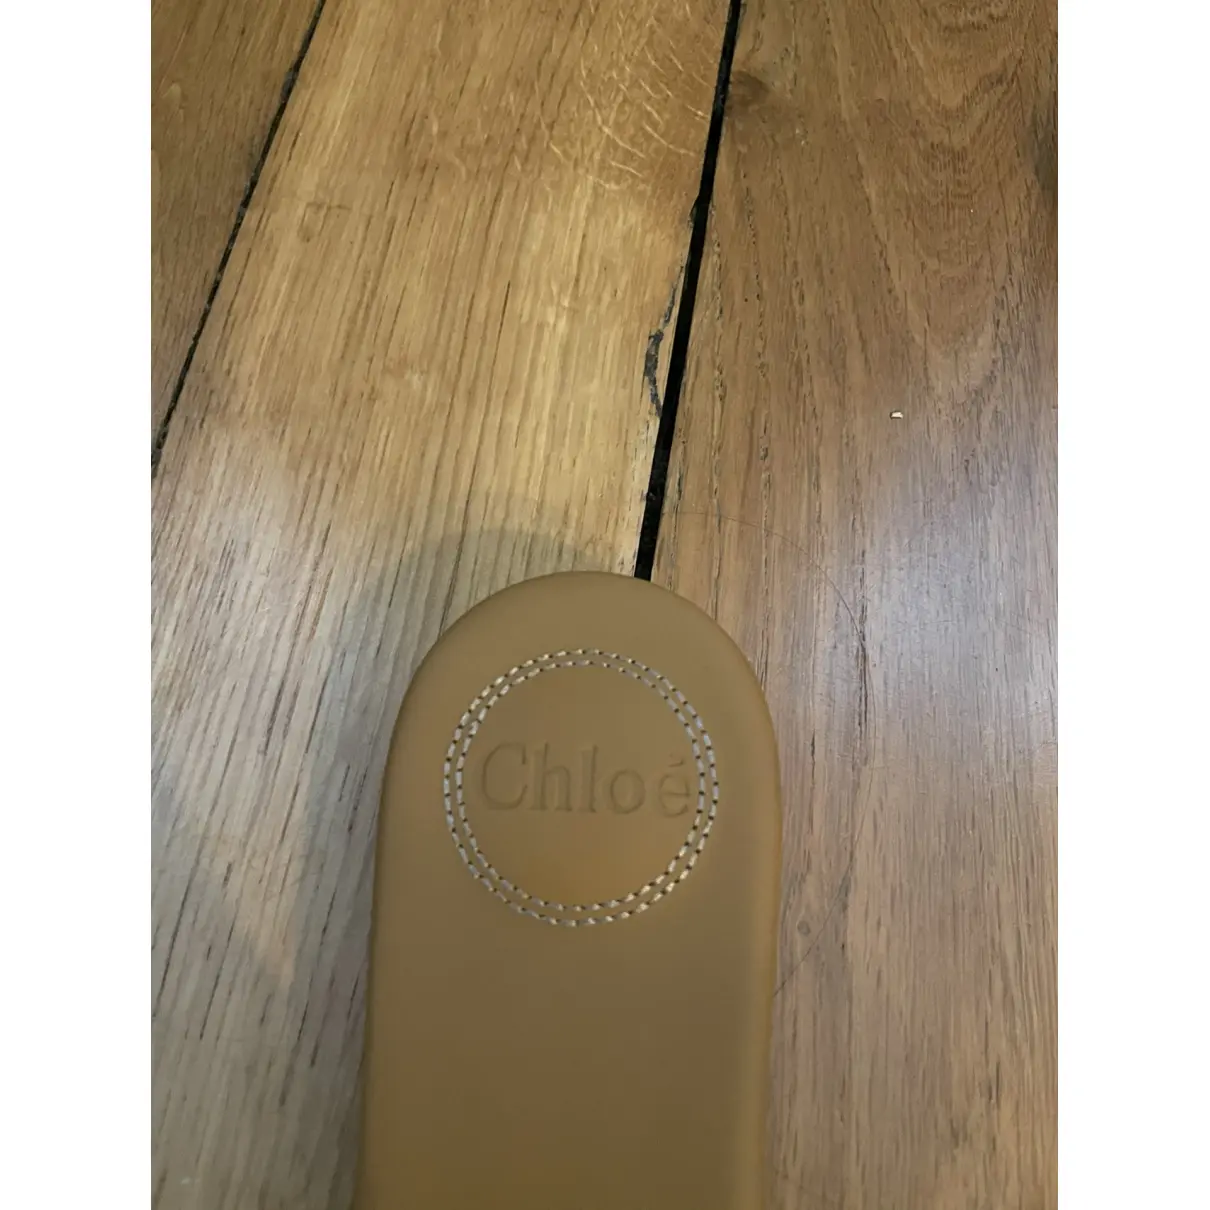 Buy Chloé C leather mules online